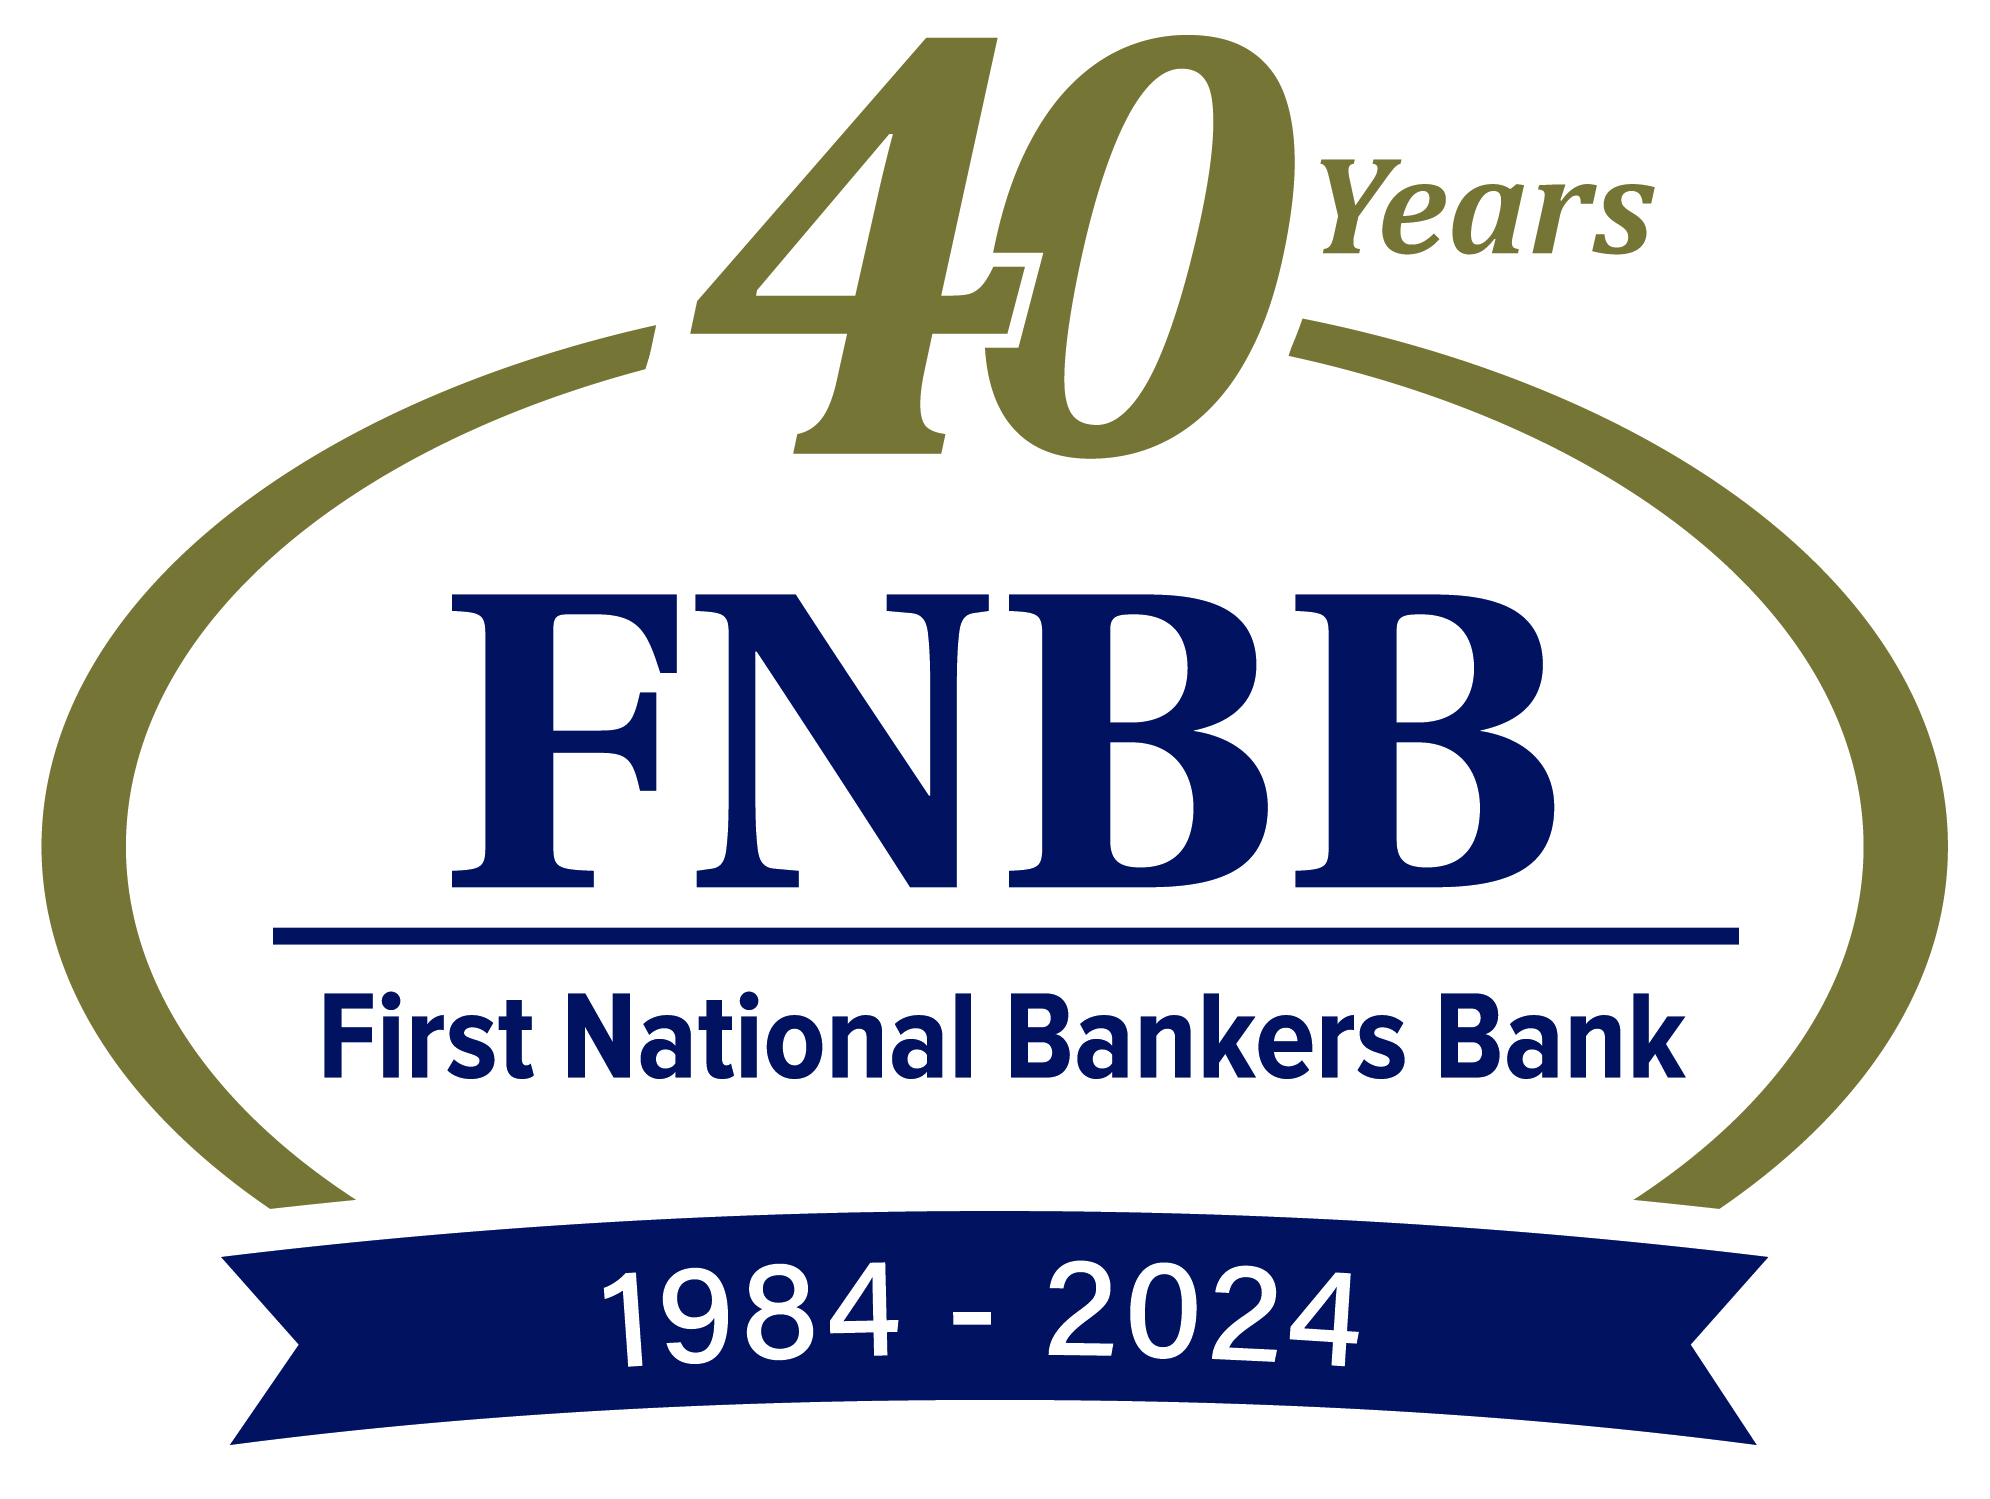 First National Bankers Bank 